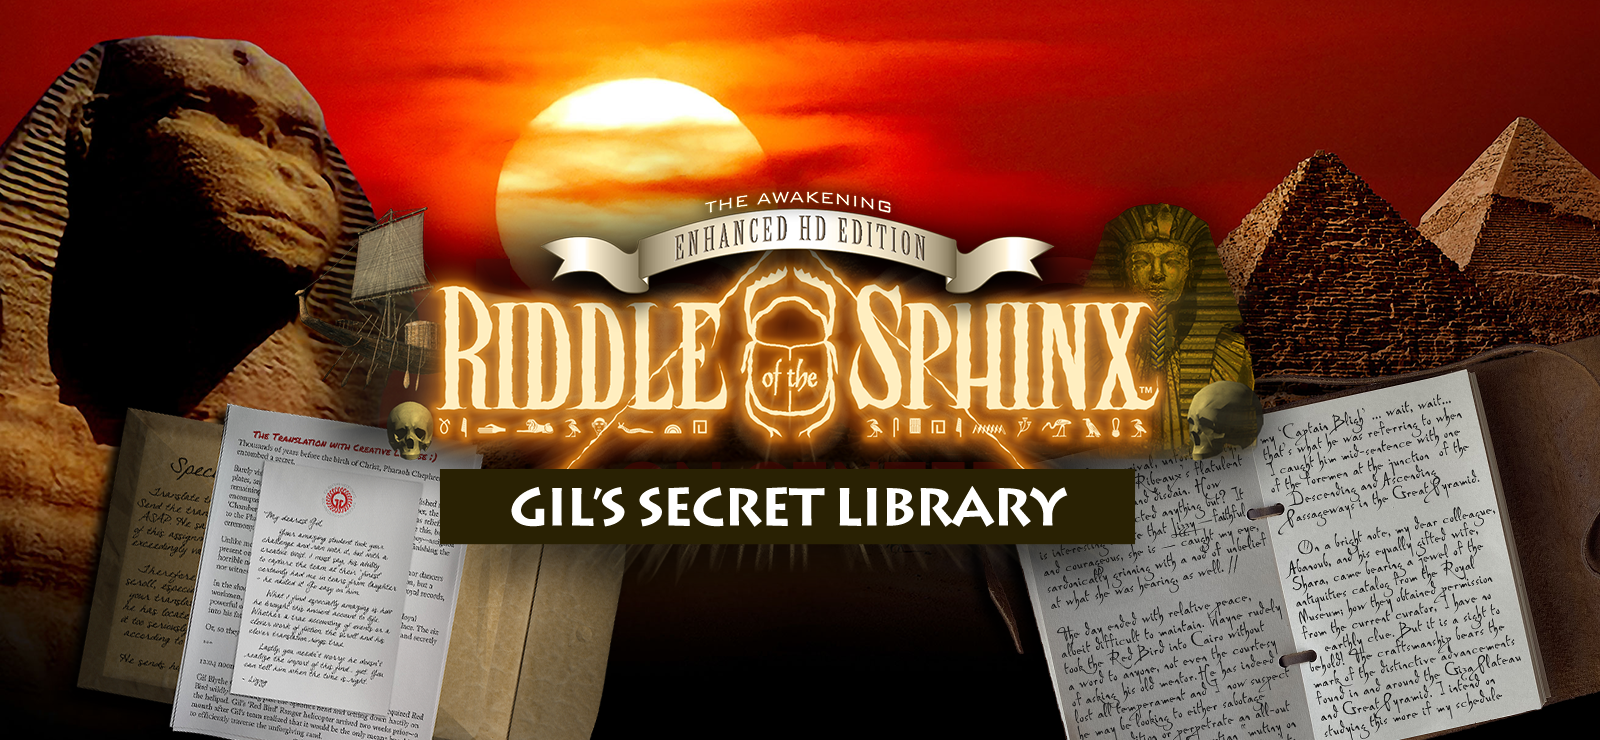 Riddle Of The Sphinx™ Gil’s Secret Library